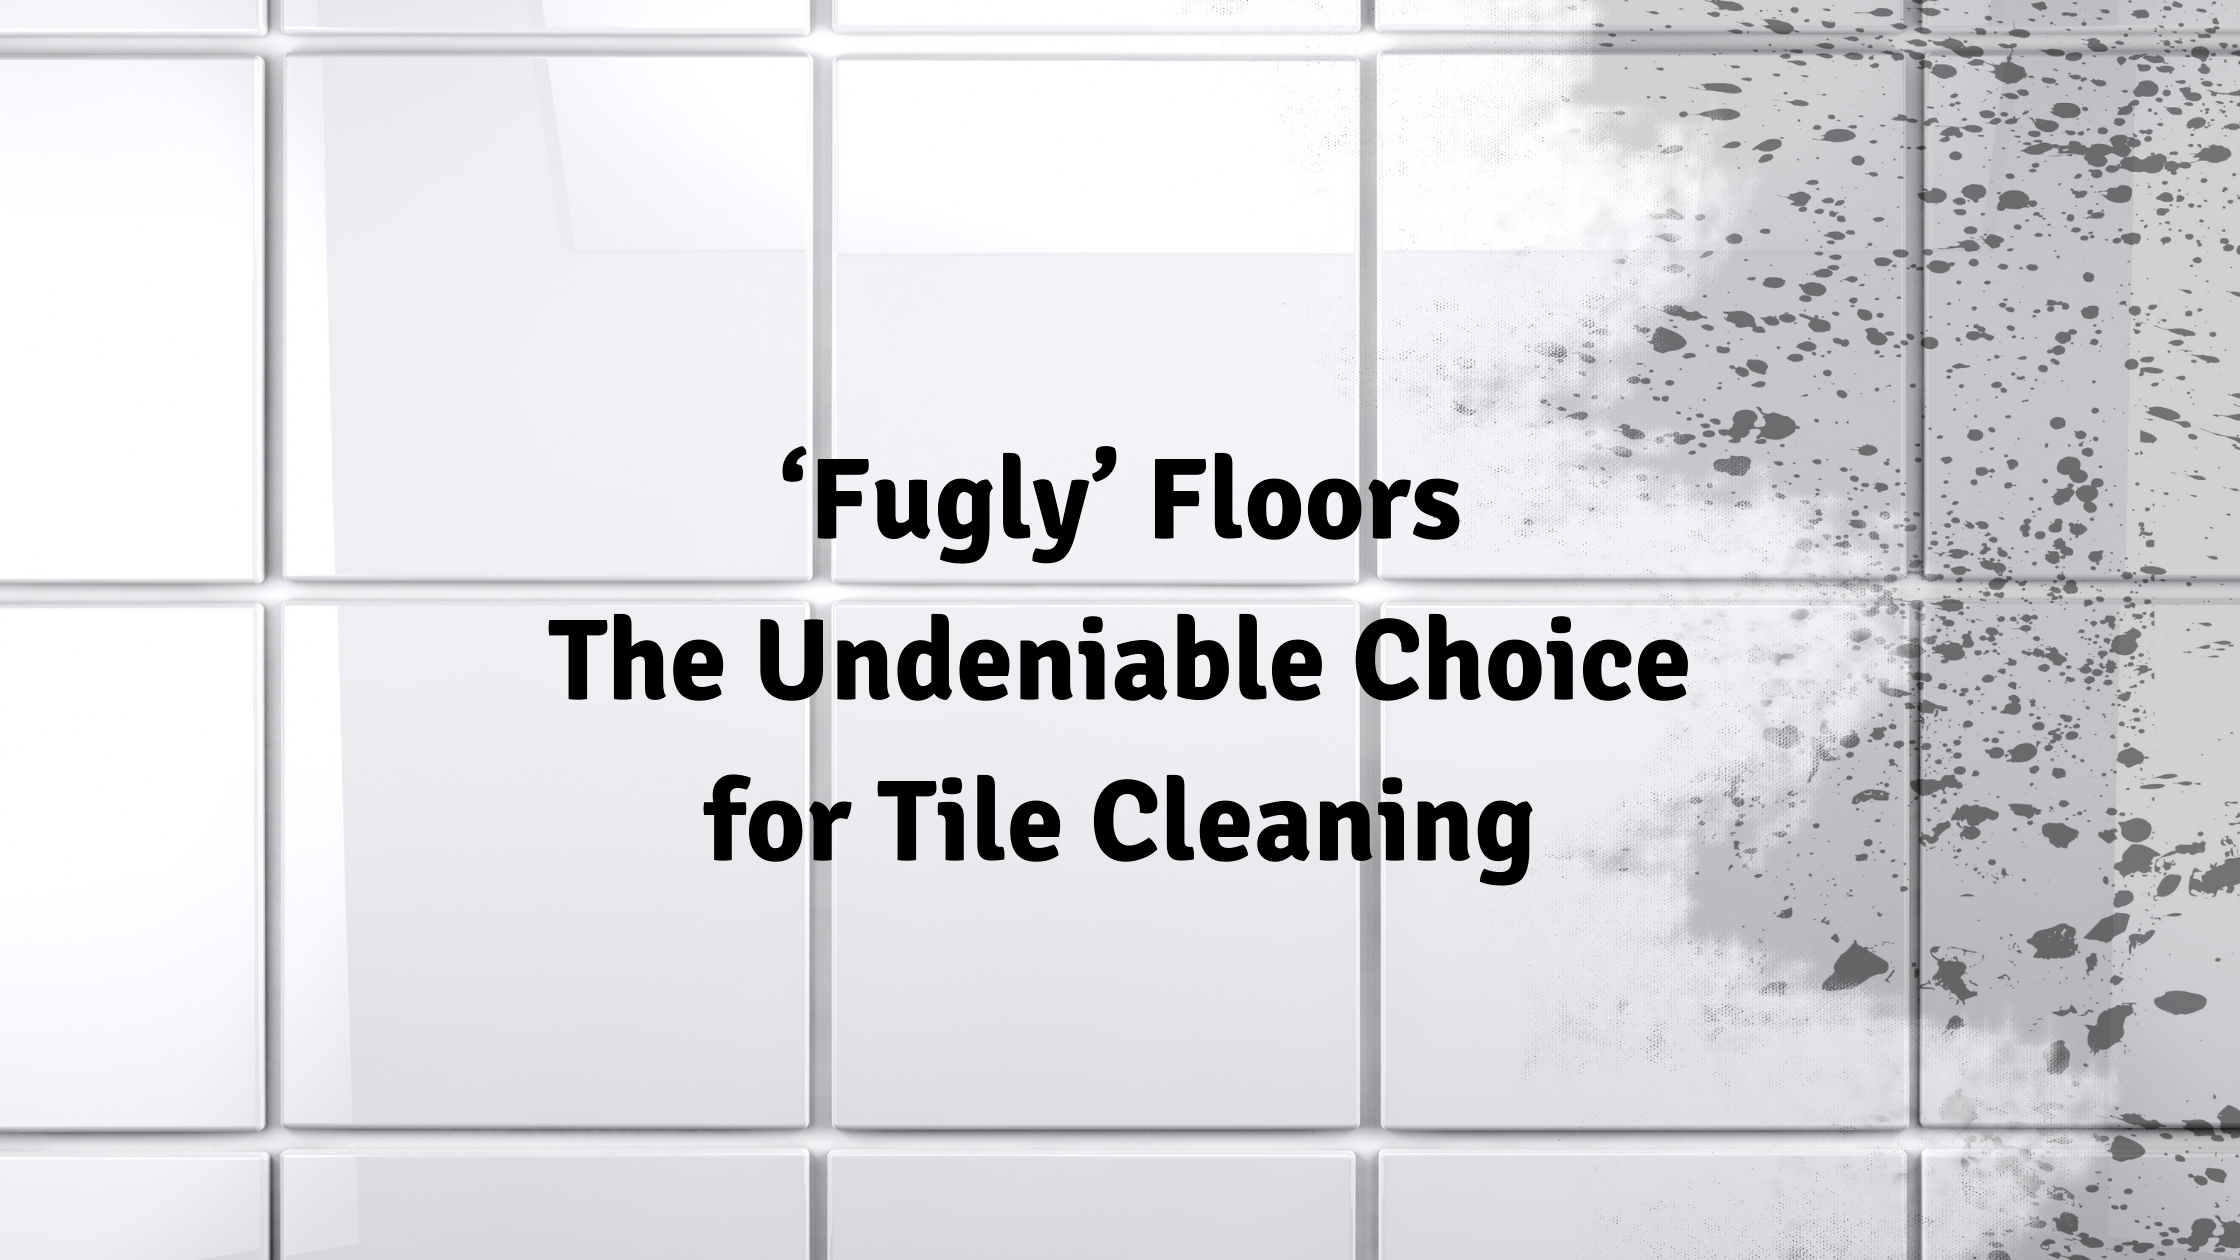 ‘Fugly’ Floors – The Undeniable Choice for Tile Cleaning 8